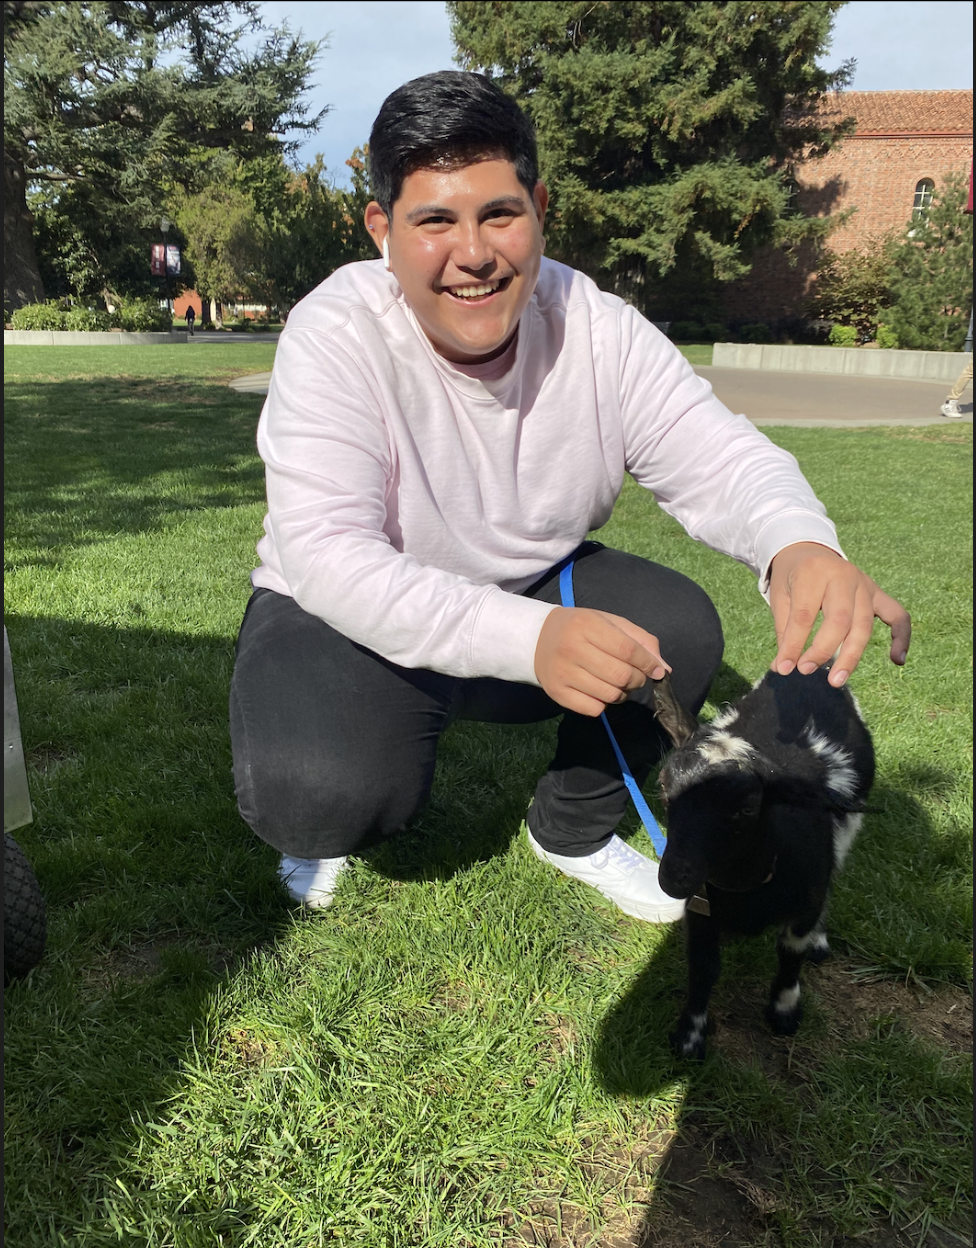 Chris with goat